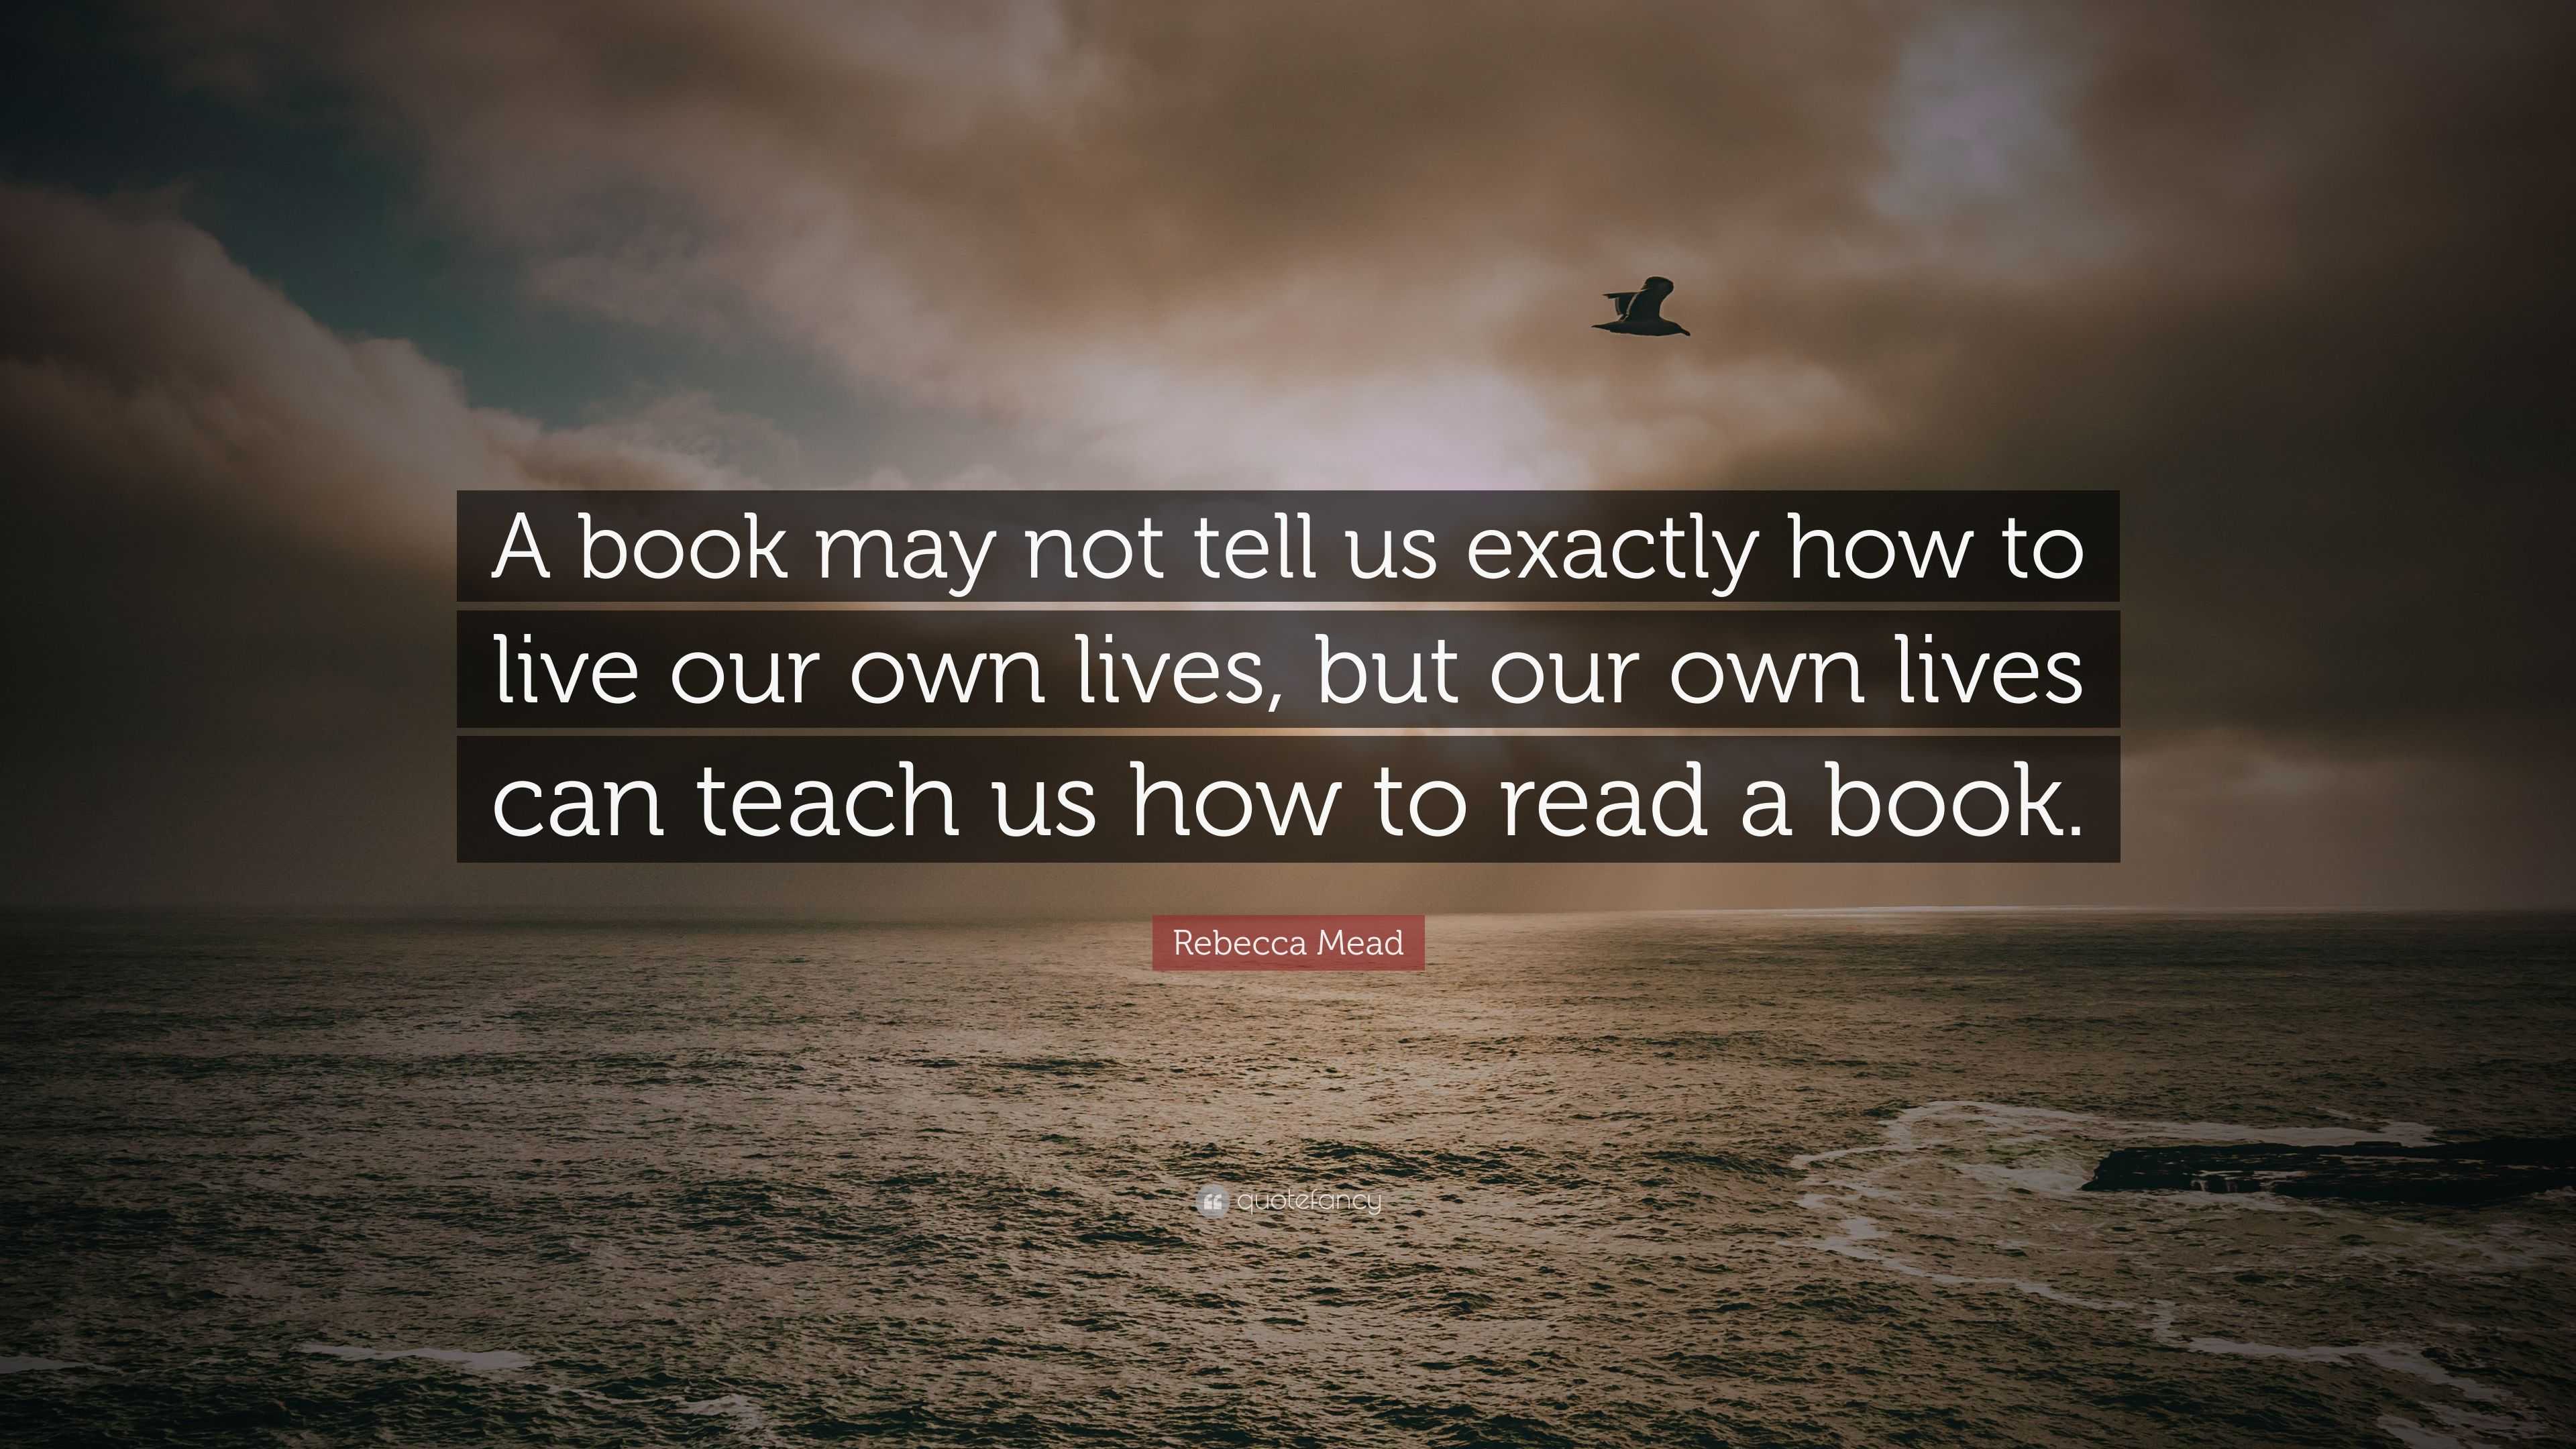 Rebecca Mead Quote: “A book may not tell us exactly how to live our own ...